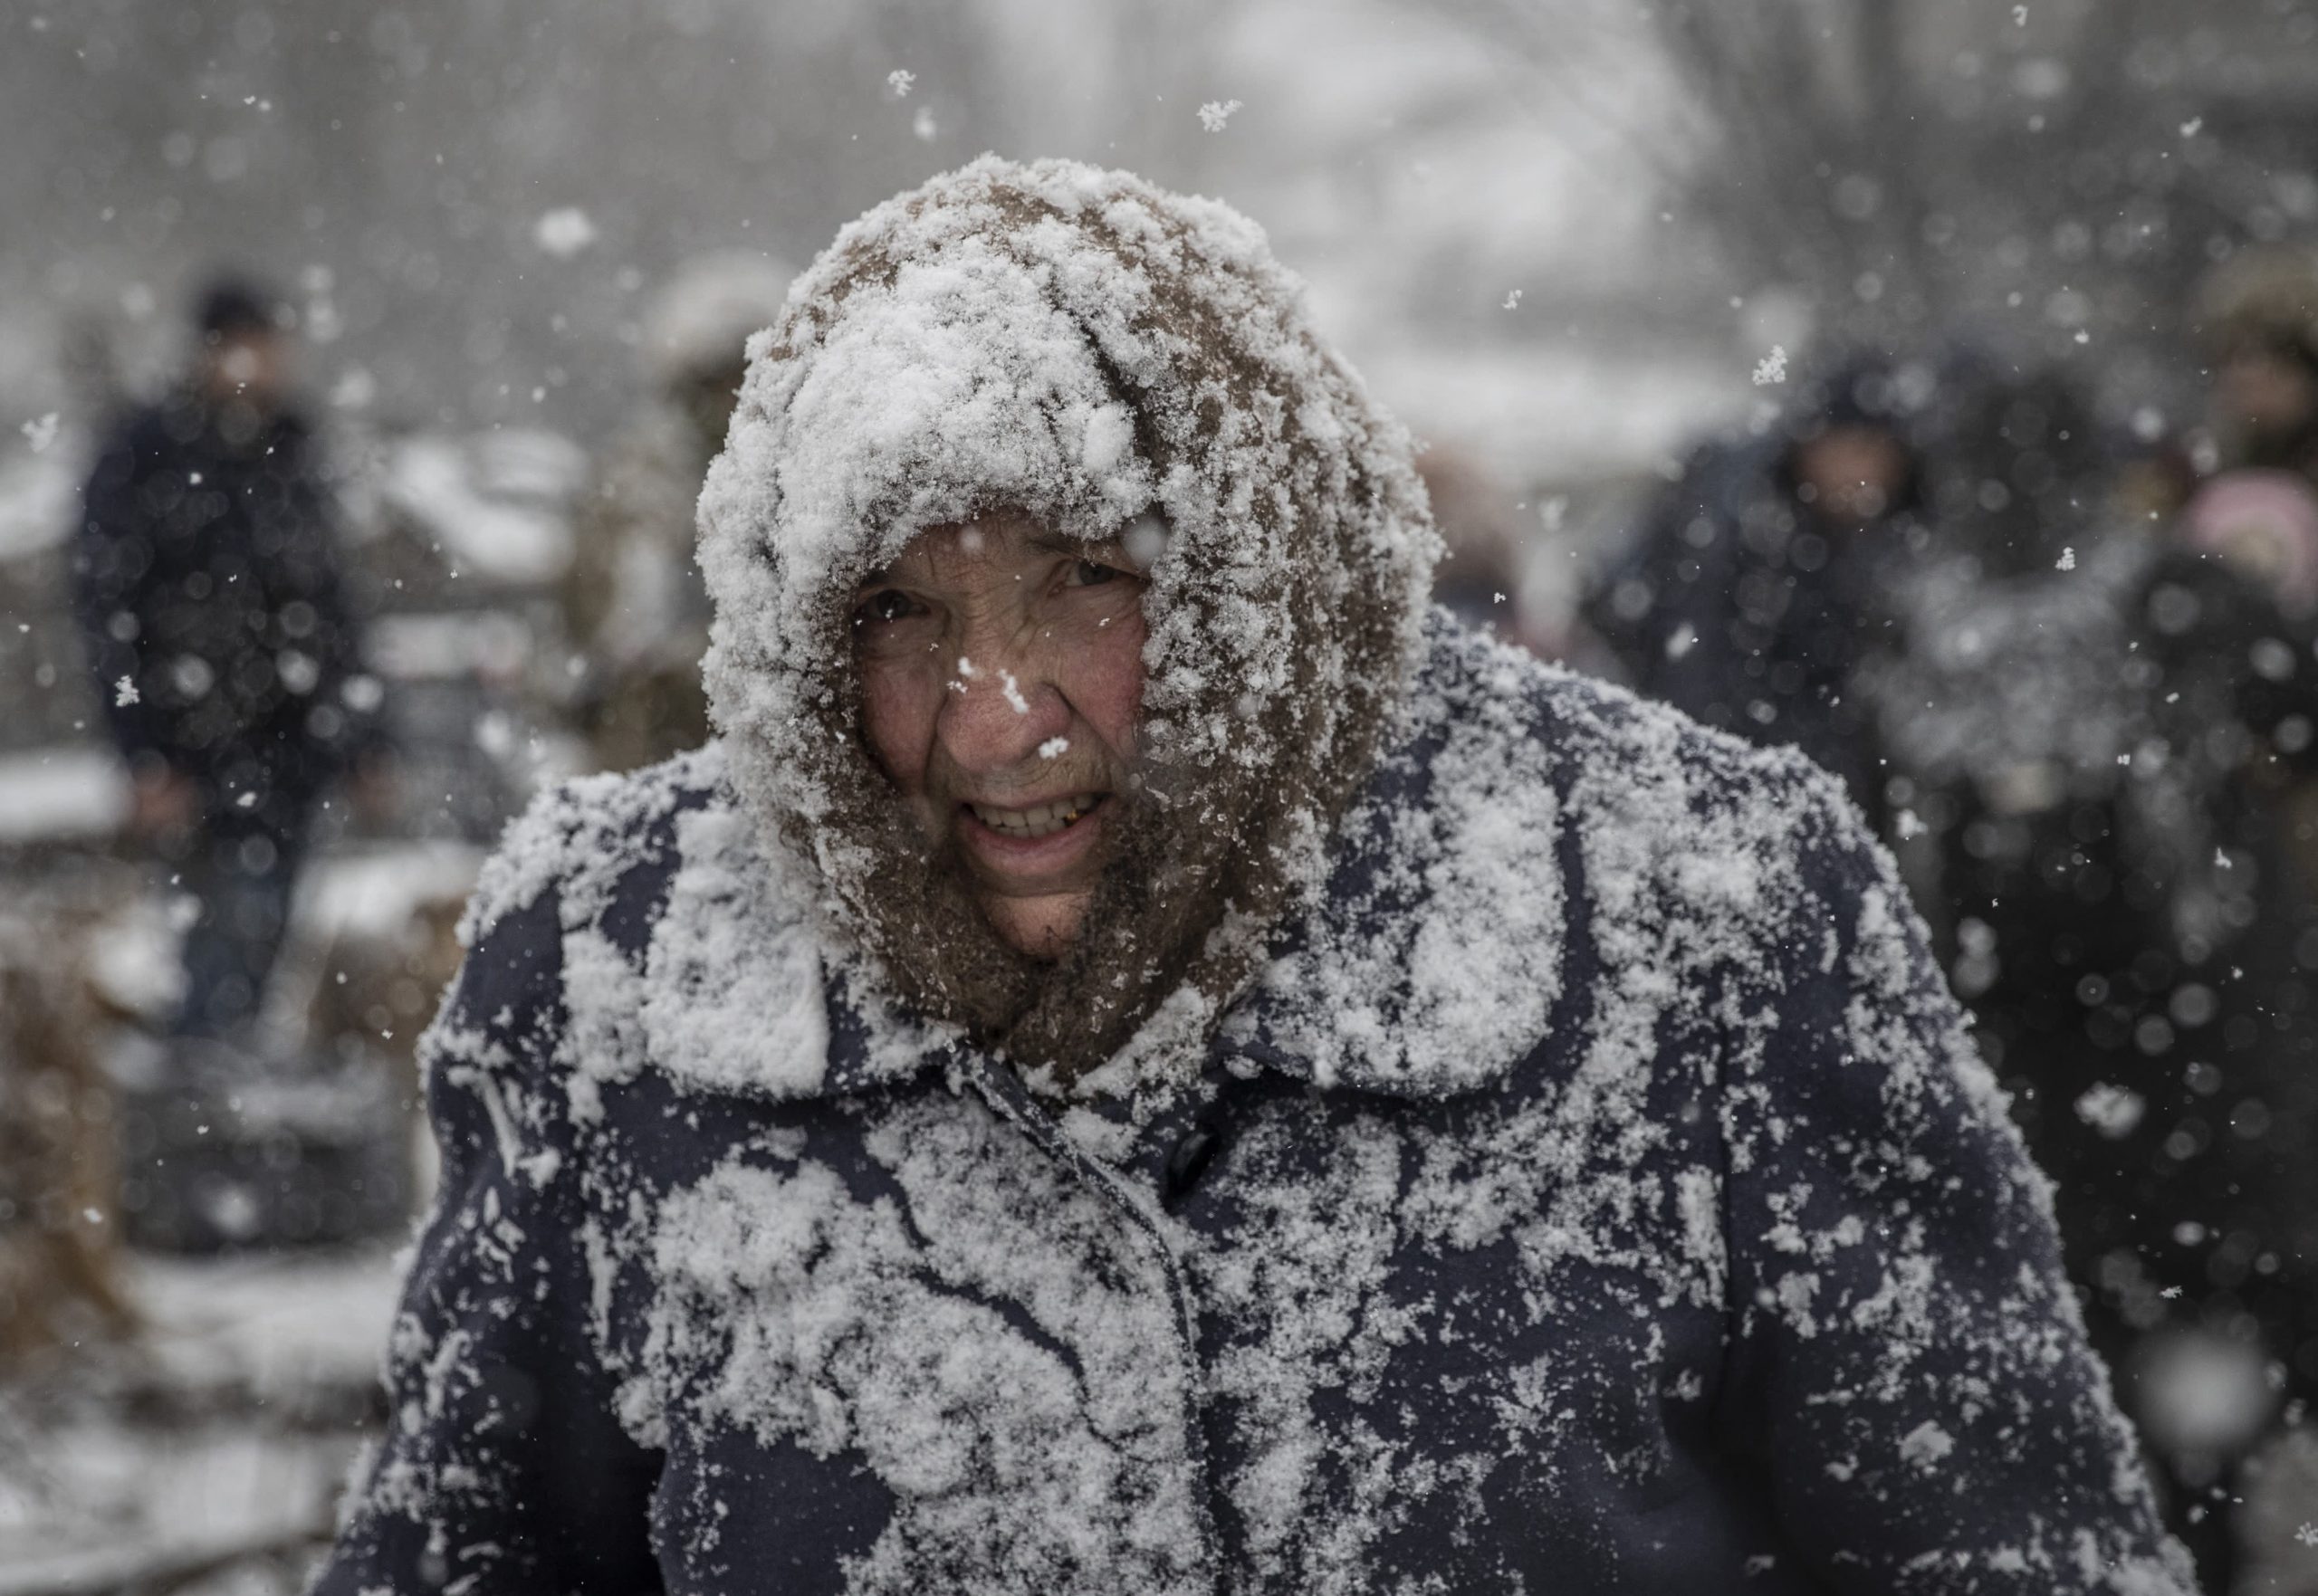 WHO Warns – Millions Of Lives Under Threat In Ukraine This Winter